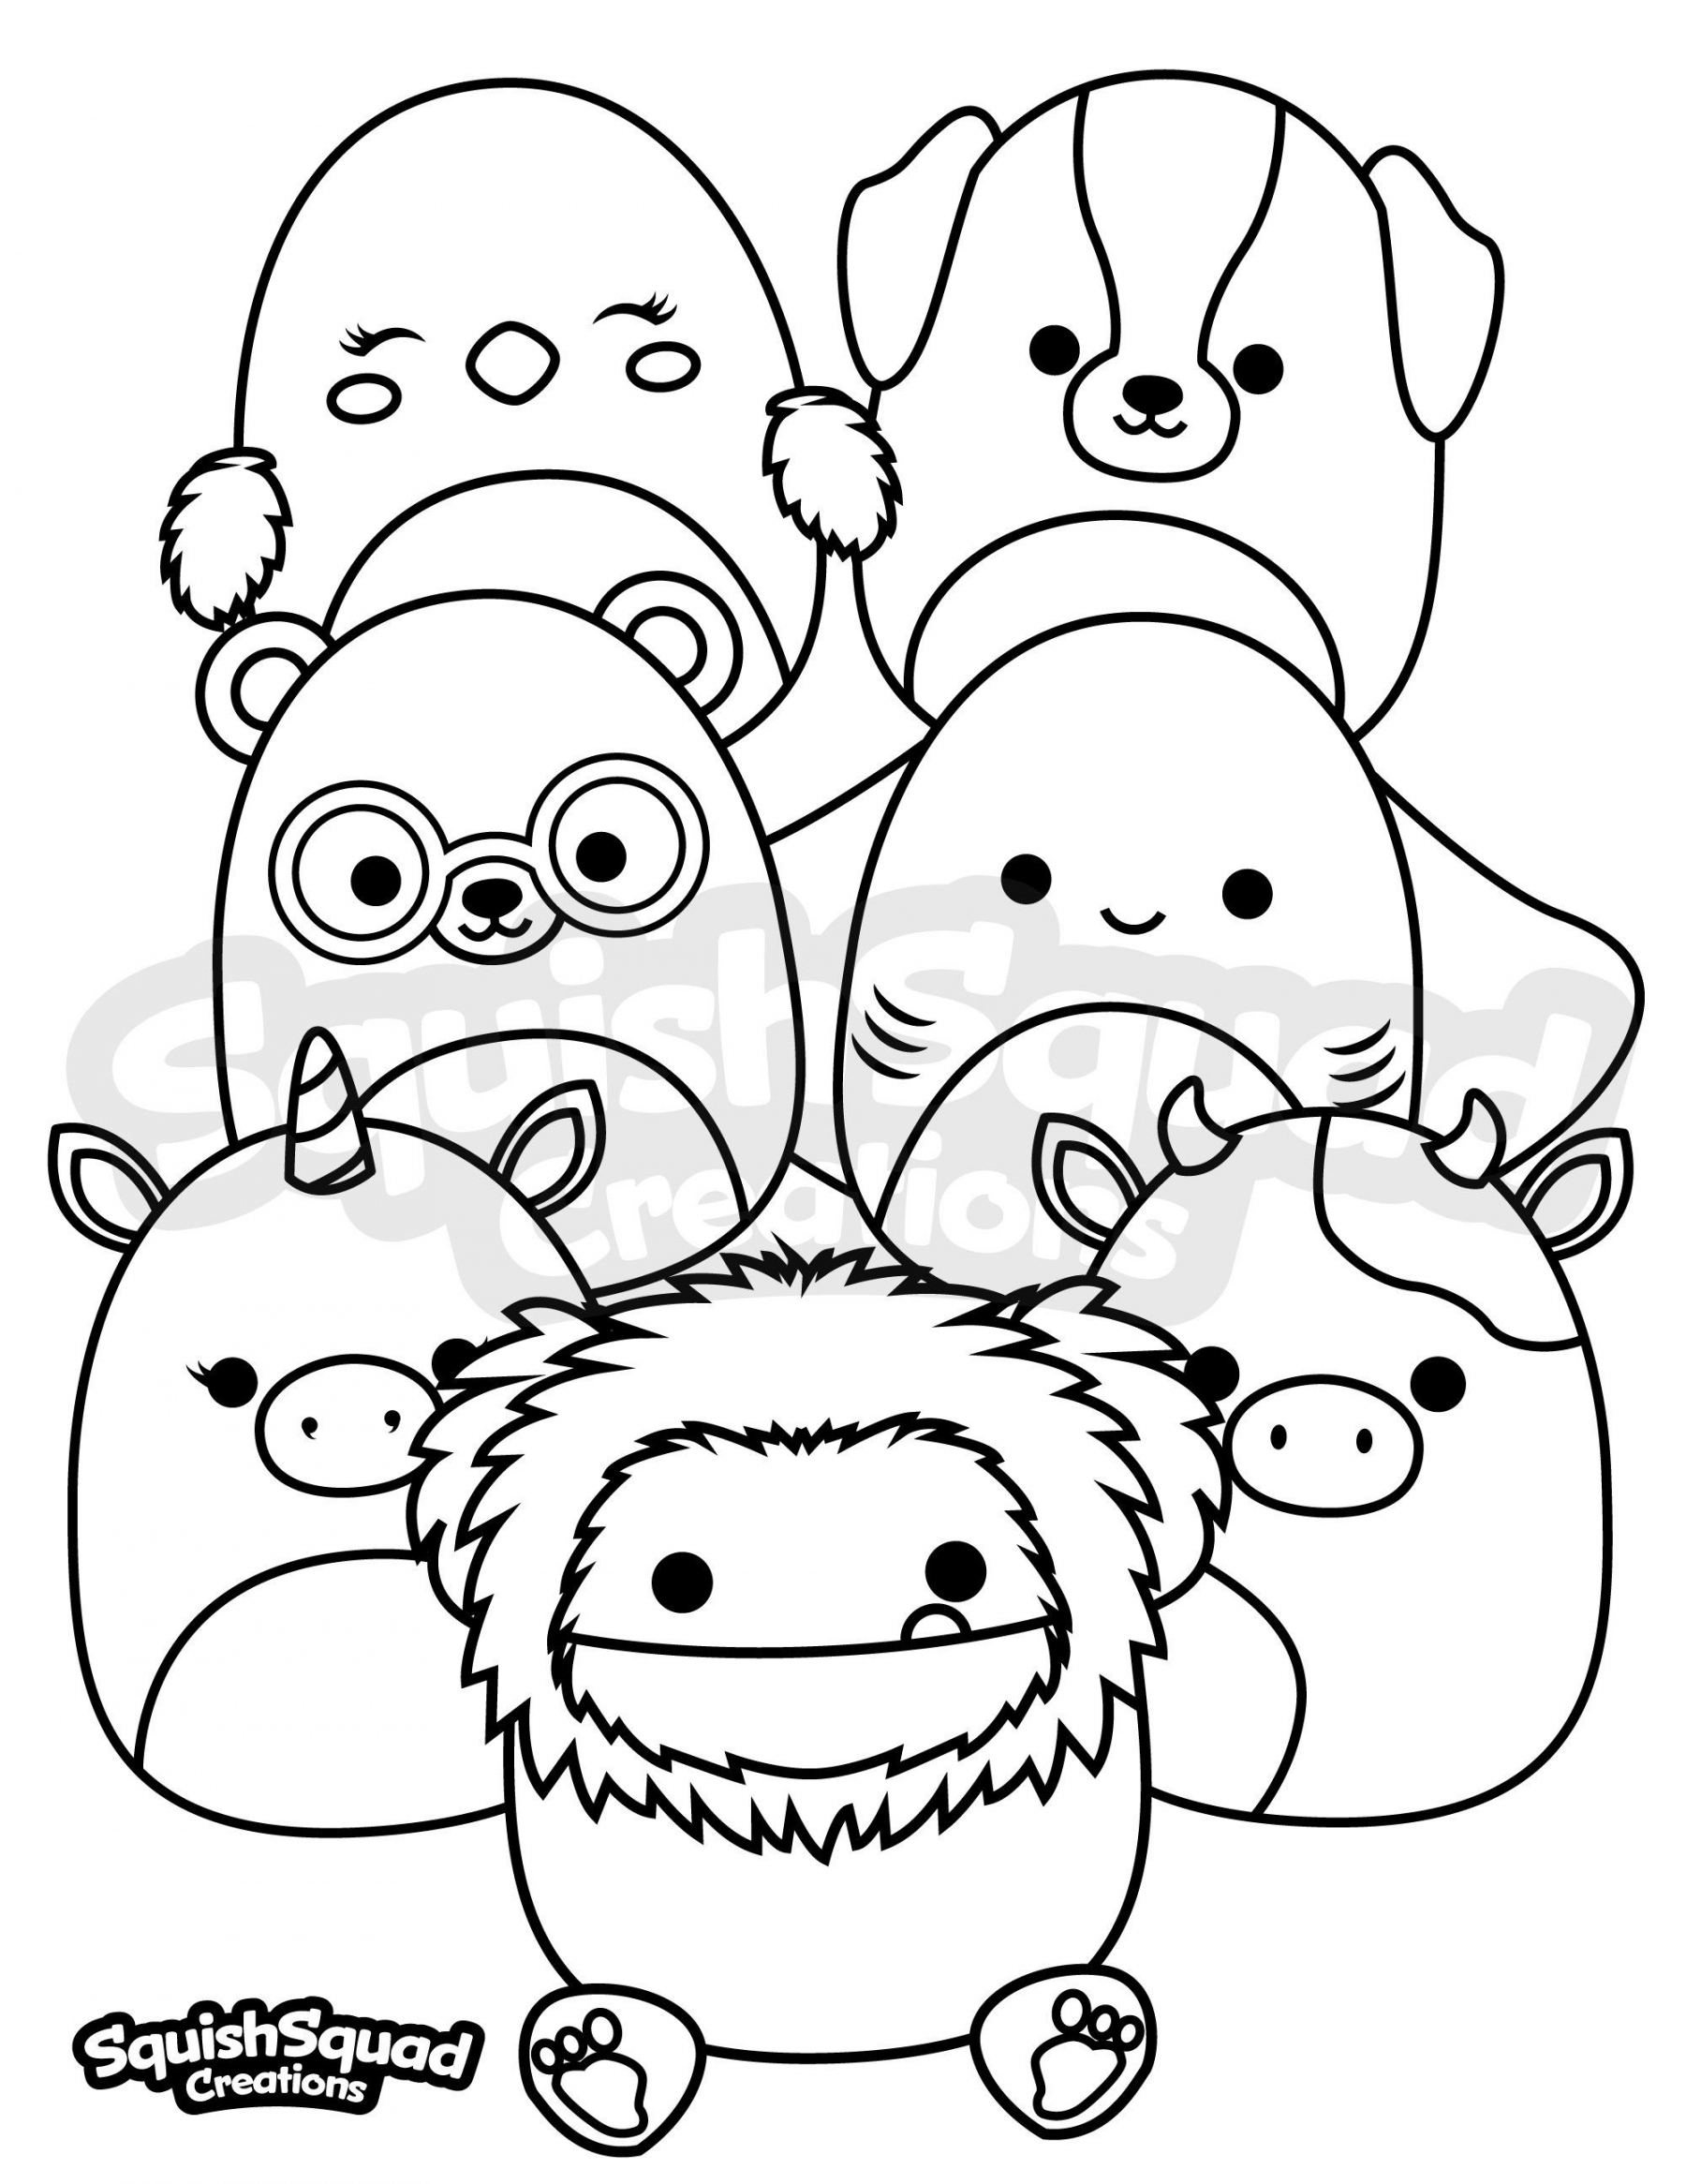 Squishmallow Coloring Page Printable Squishmallow Coloring - Etsy  - FREE Printables - Free Printable Squishmallow Coloring Pages